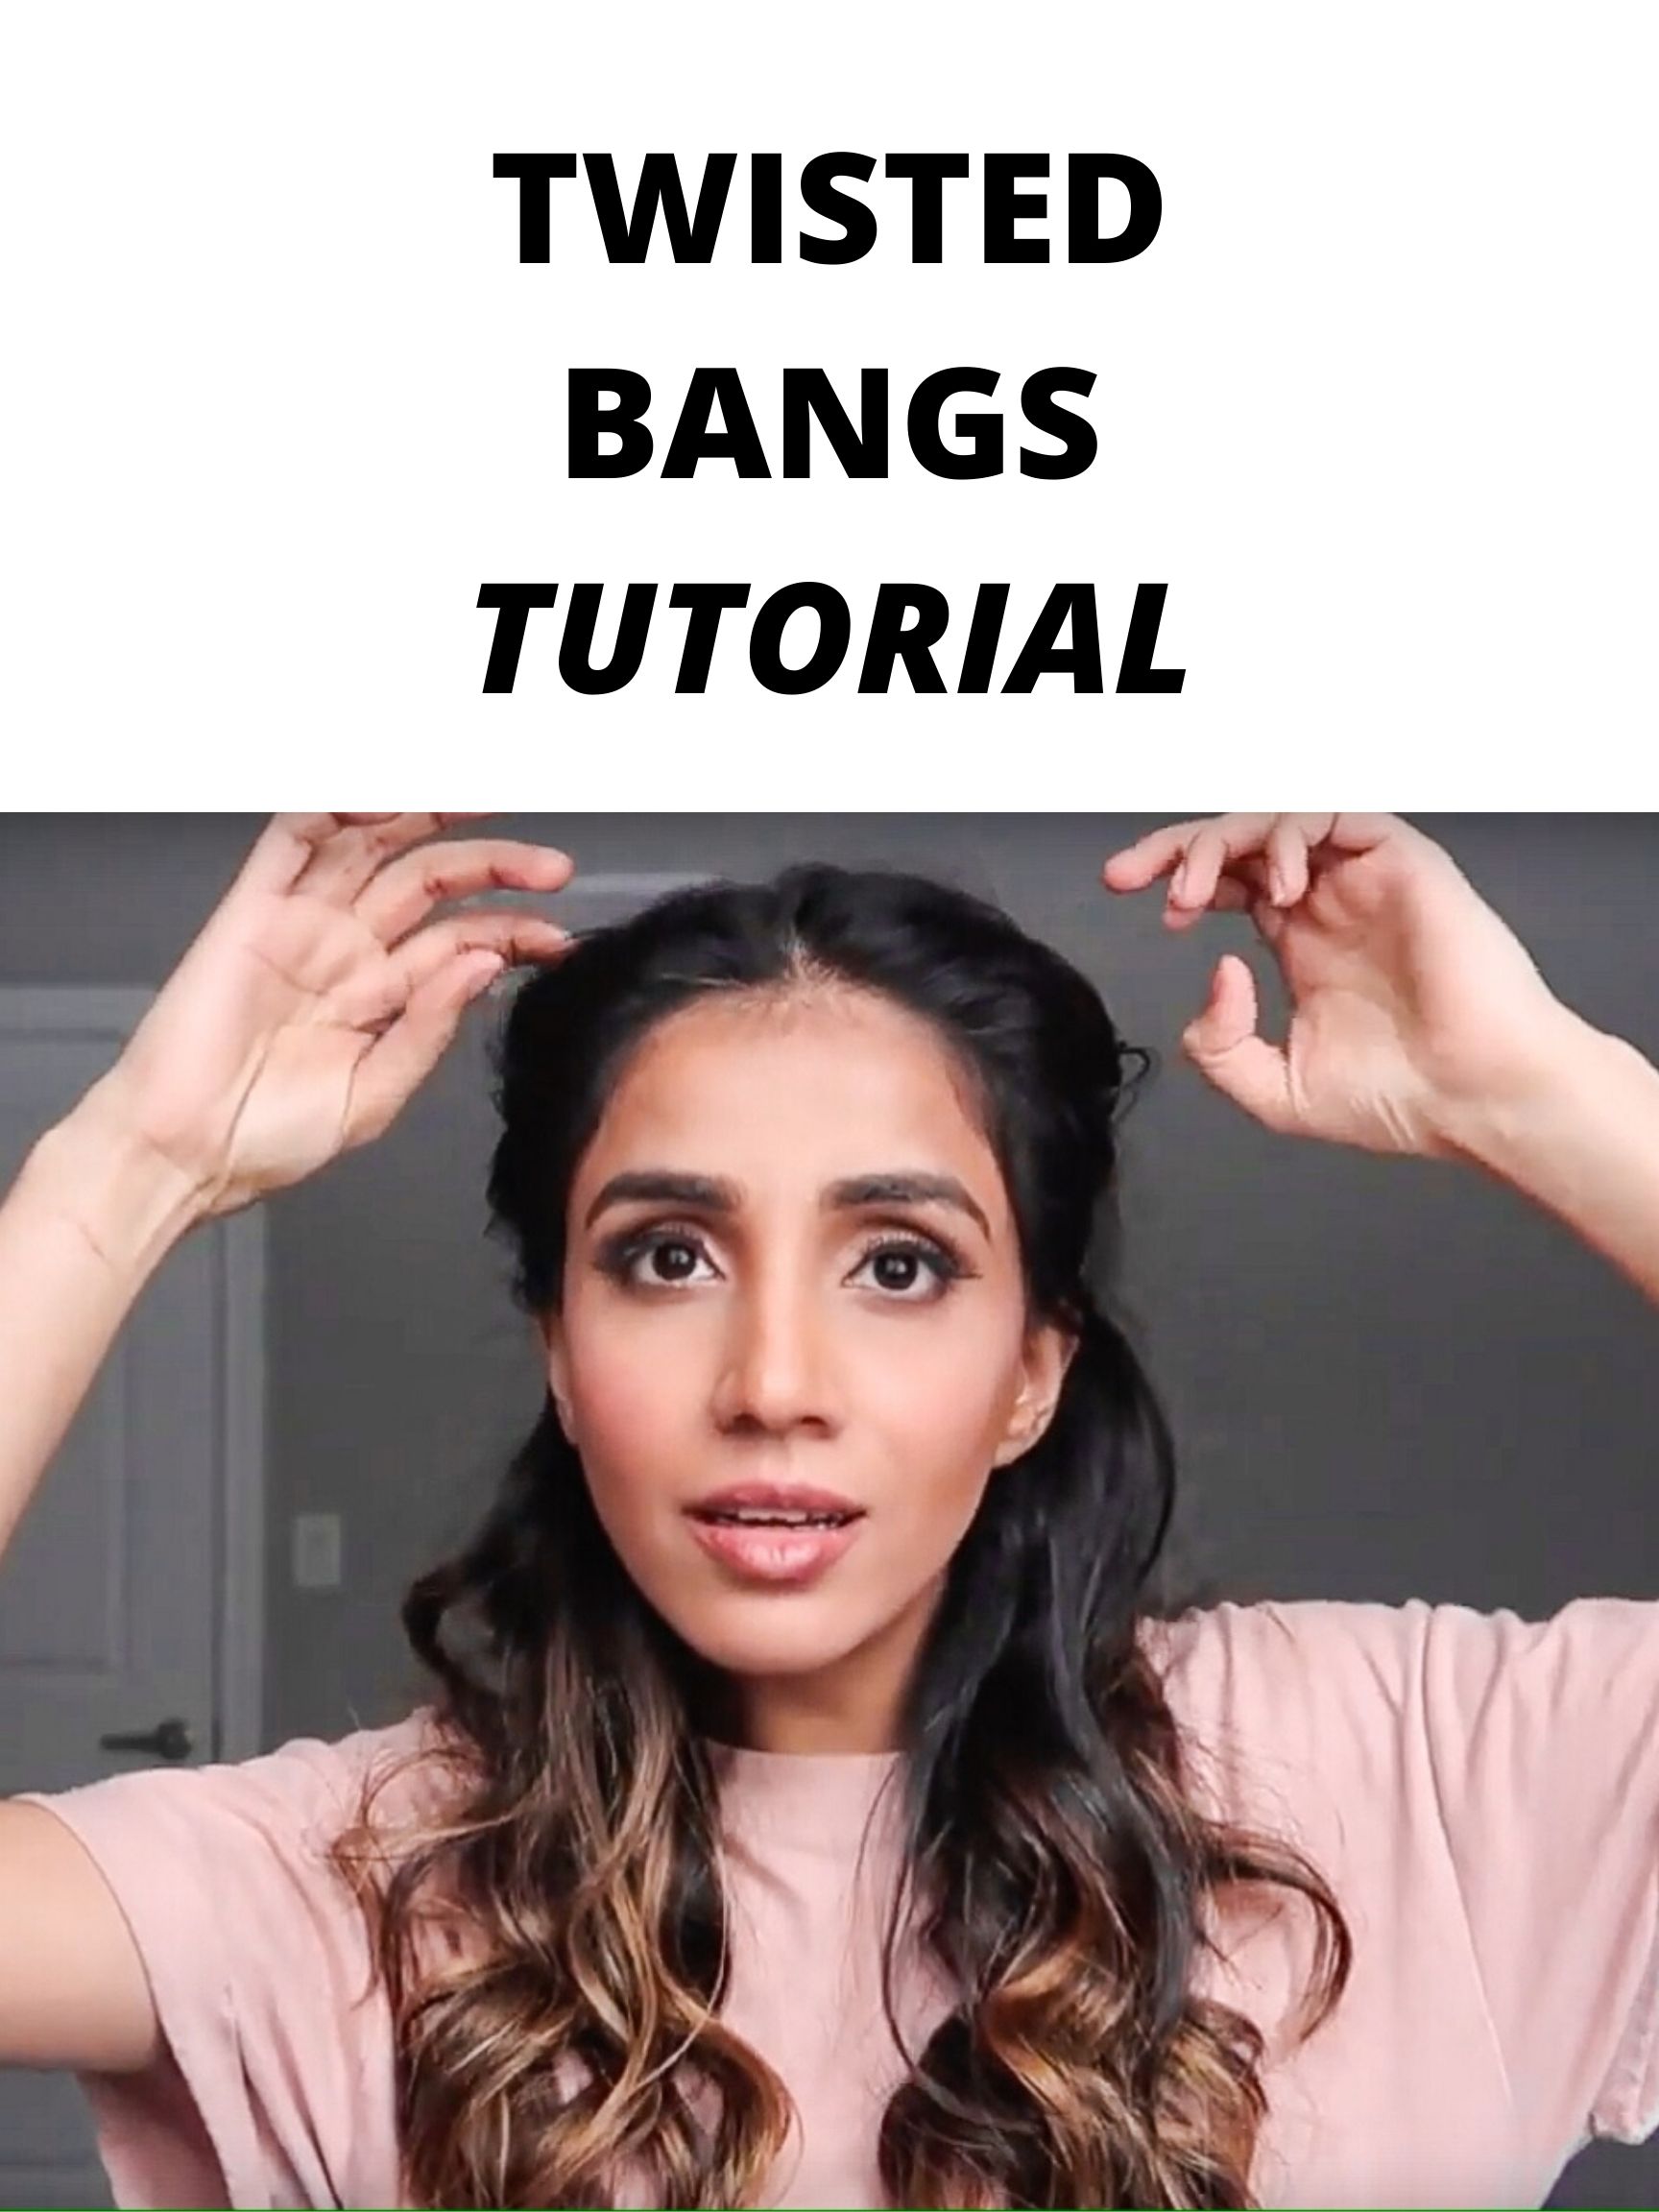 TWISTED BANGS TUTORIAL video hairstyles to go evening look hairstyle